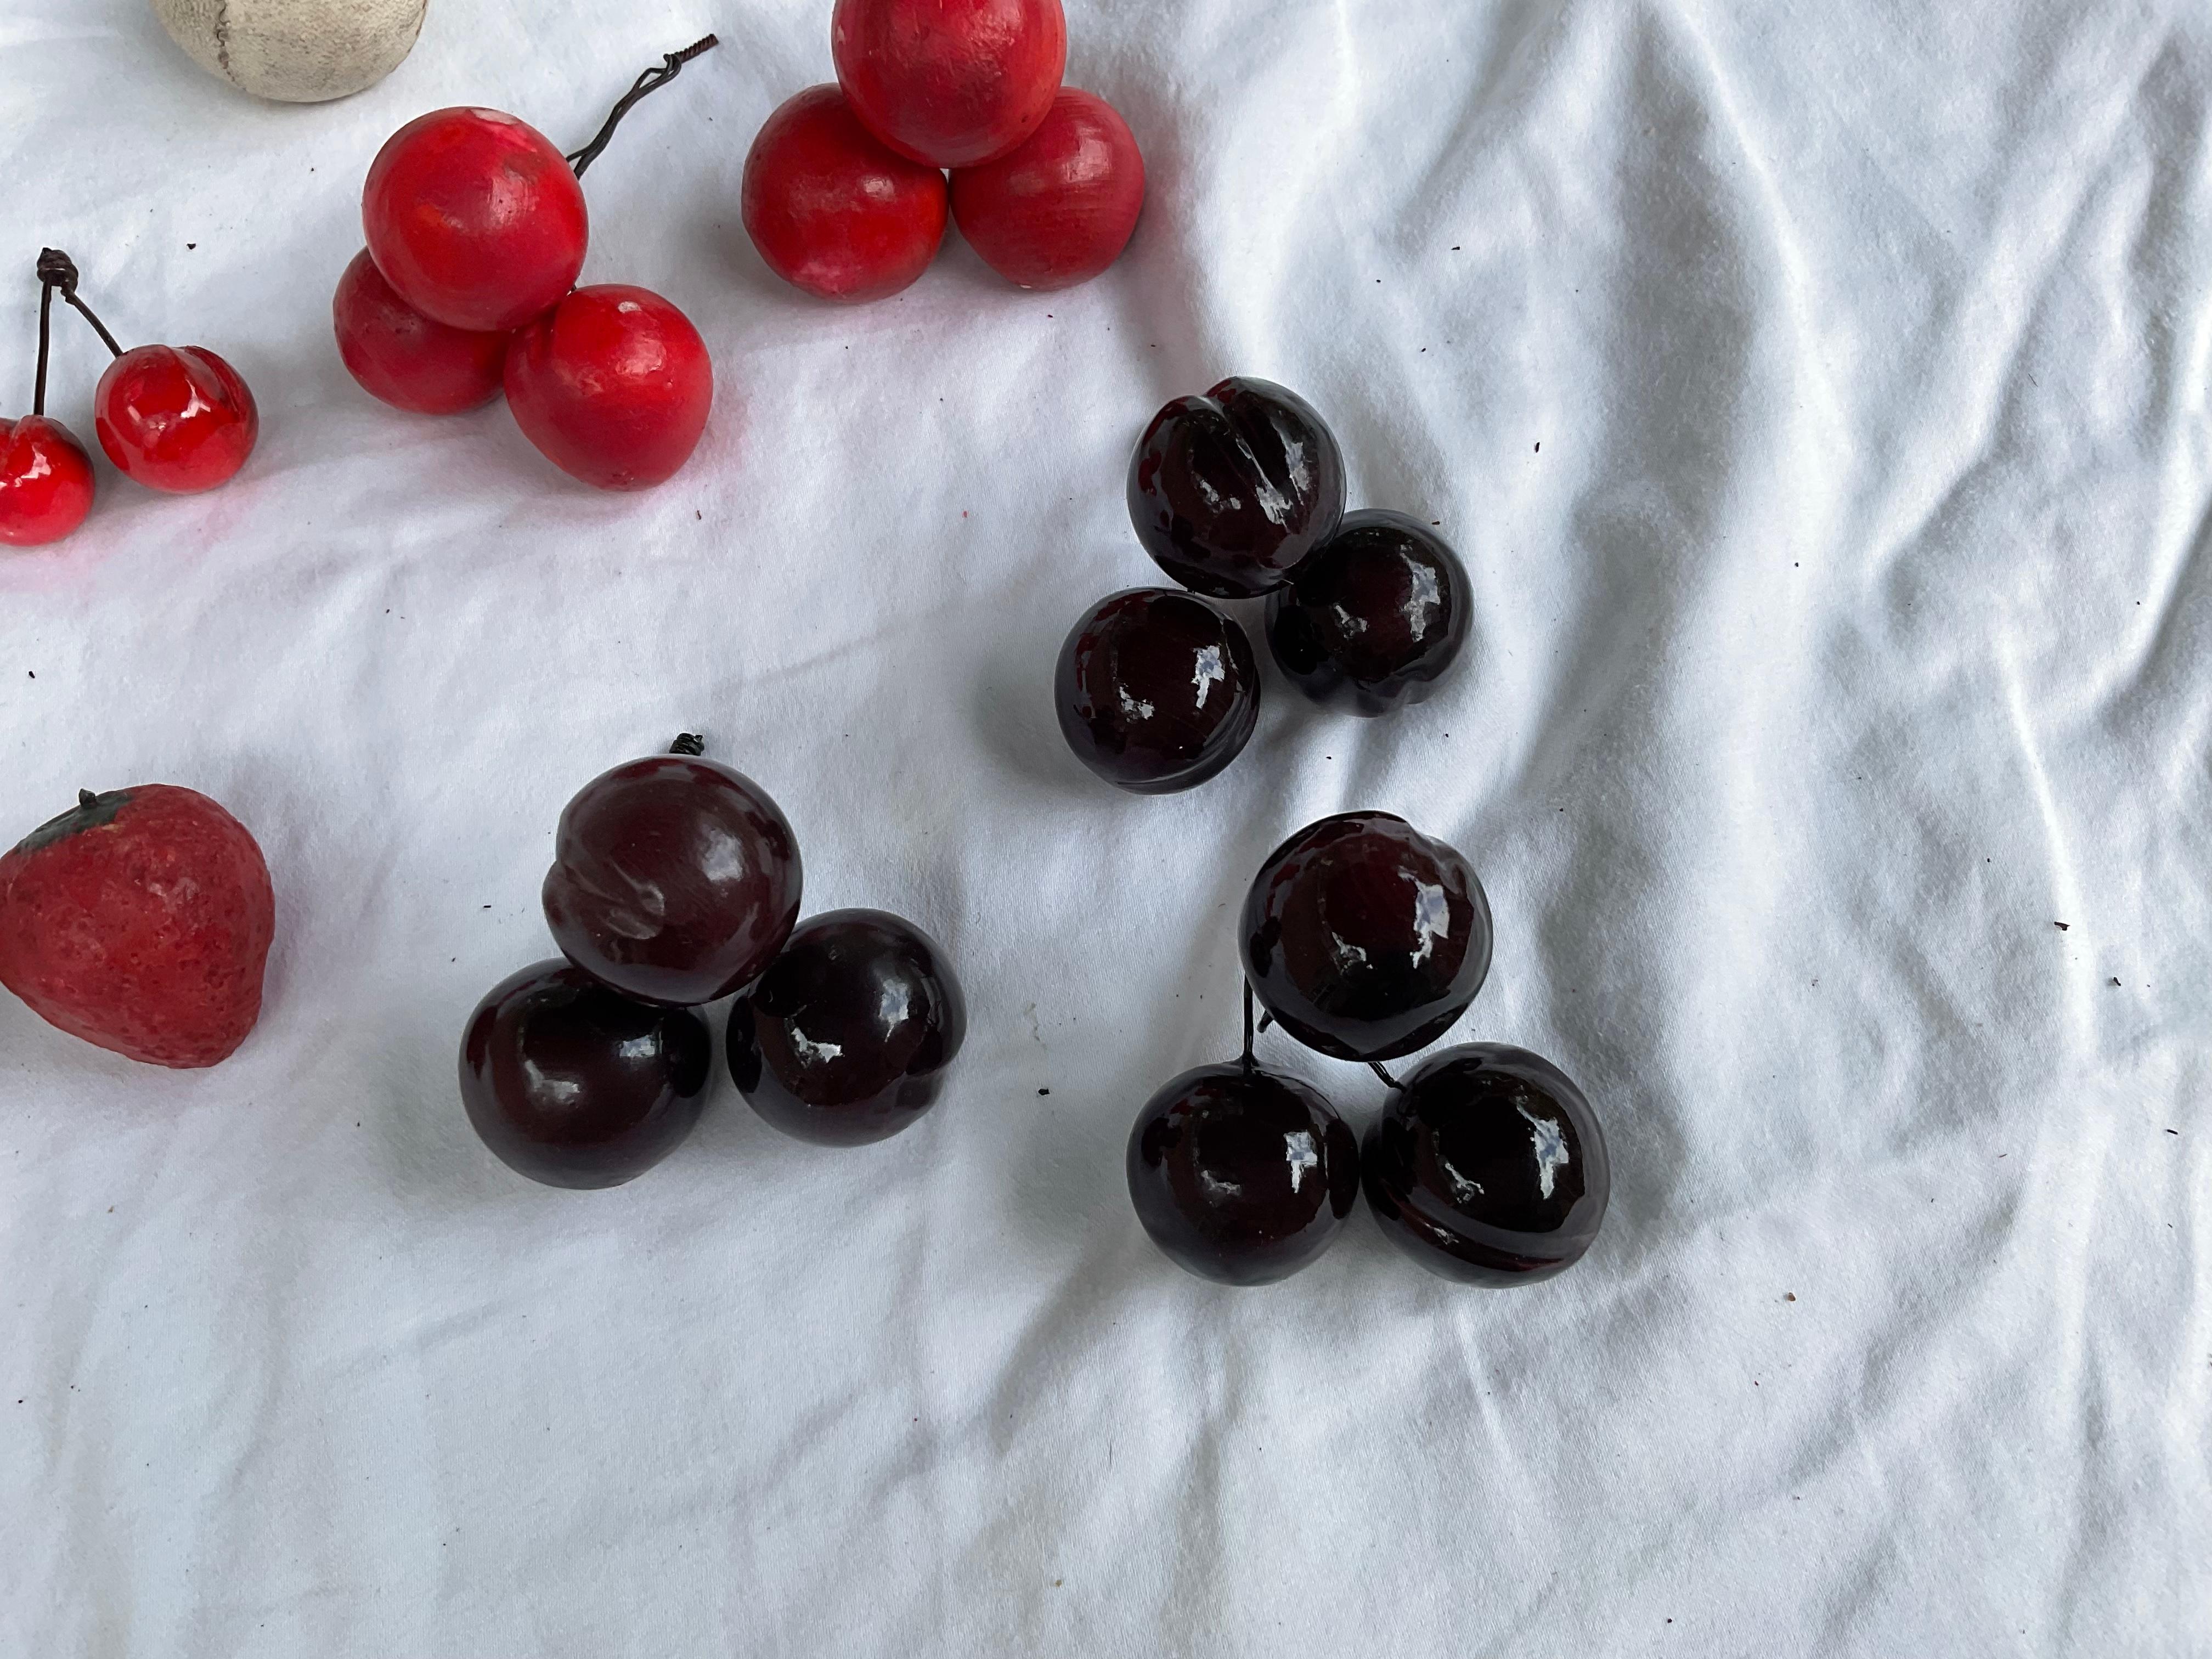 This bunch of mainly cherries, has been purchased at different times, in different places. There are 2 bunches of 3 cherries each, in a pinkish red color. There are 3 bunches of dark red cherries. There are 2 stems, with 2 small cherries each. Also,